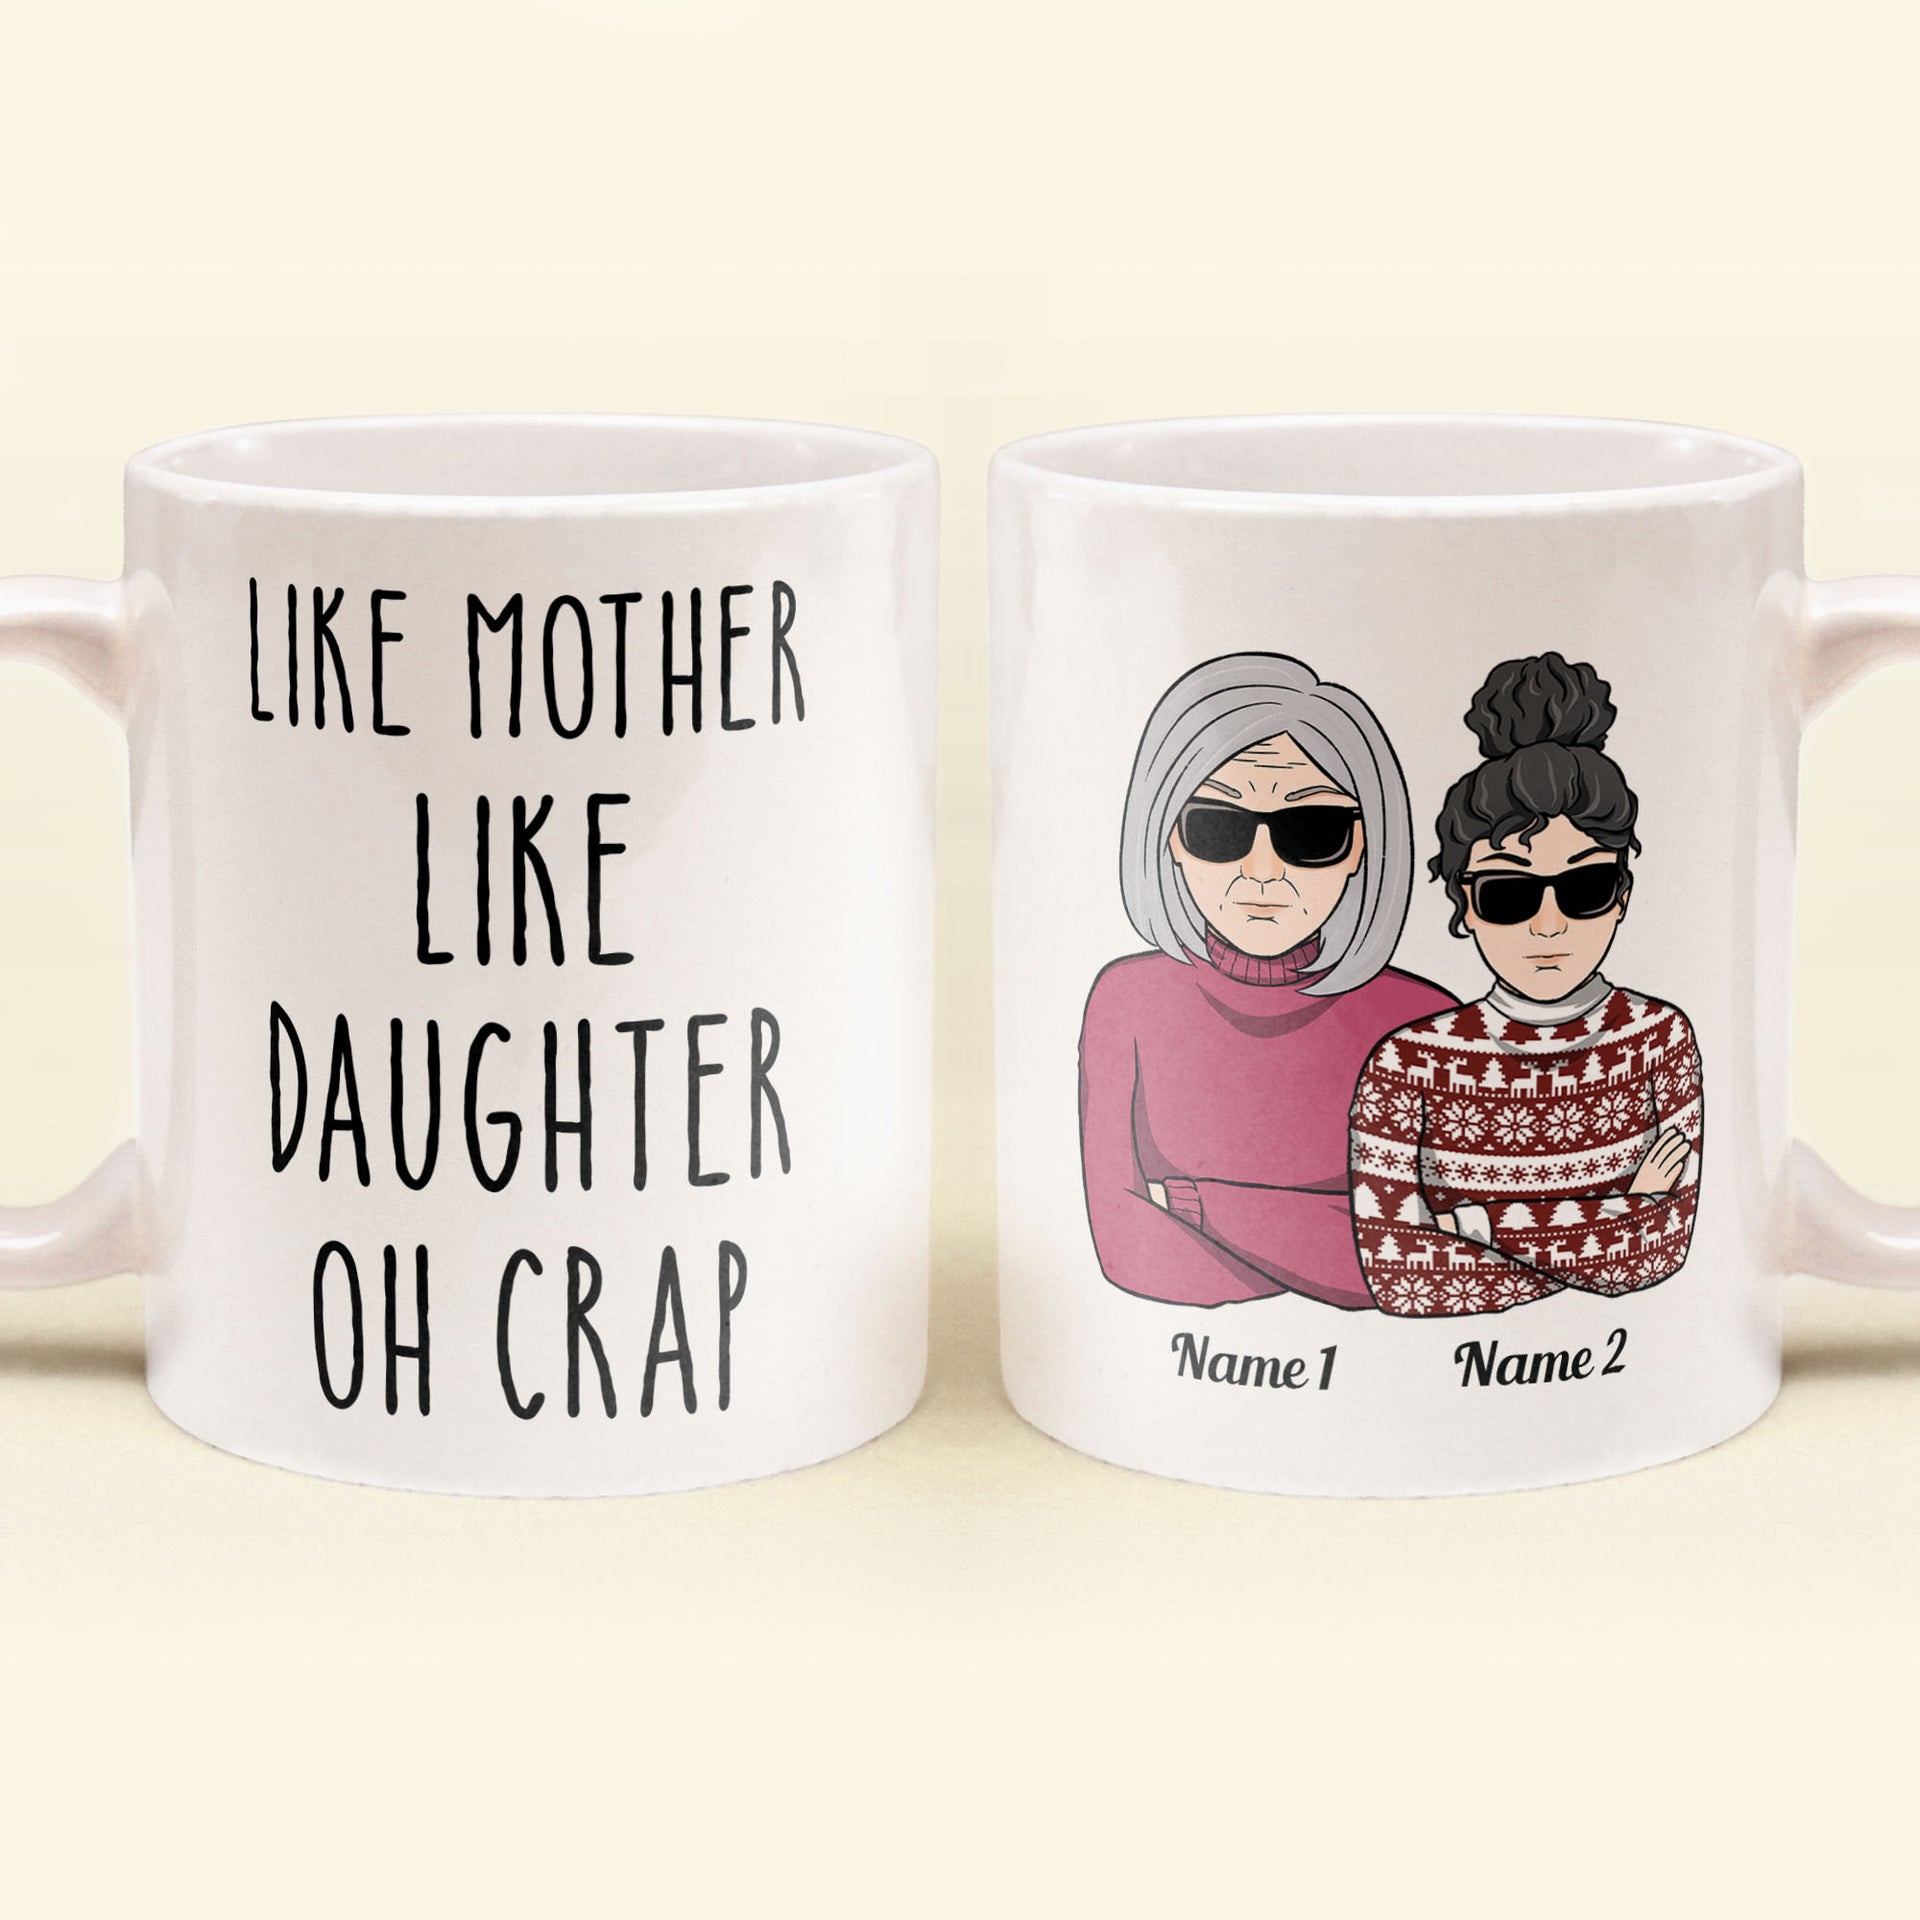 https://macorner.co/cdn/shop/products/Like-Father-Like-Daughter-Oh-Crap-Personalized-Mug-Christmas-Gift-For-Fathers_-Mothers_-Grandpas_-Grandmas_-Sons-_-Daughters_2_776ef8ab-7ccf-4f6d-a1b4-a8ad61ed8fa3.jpg?v=1636361983&width=1920